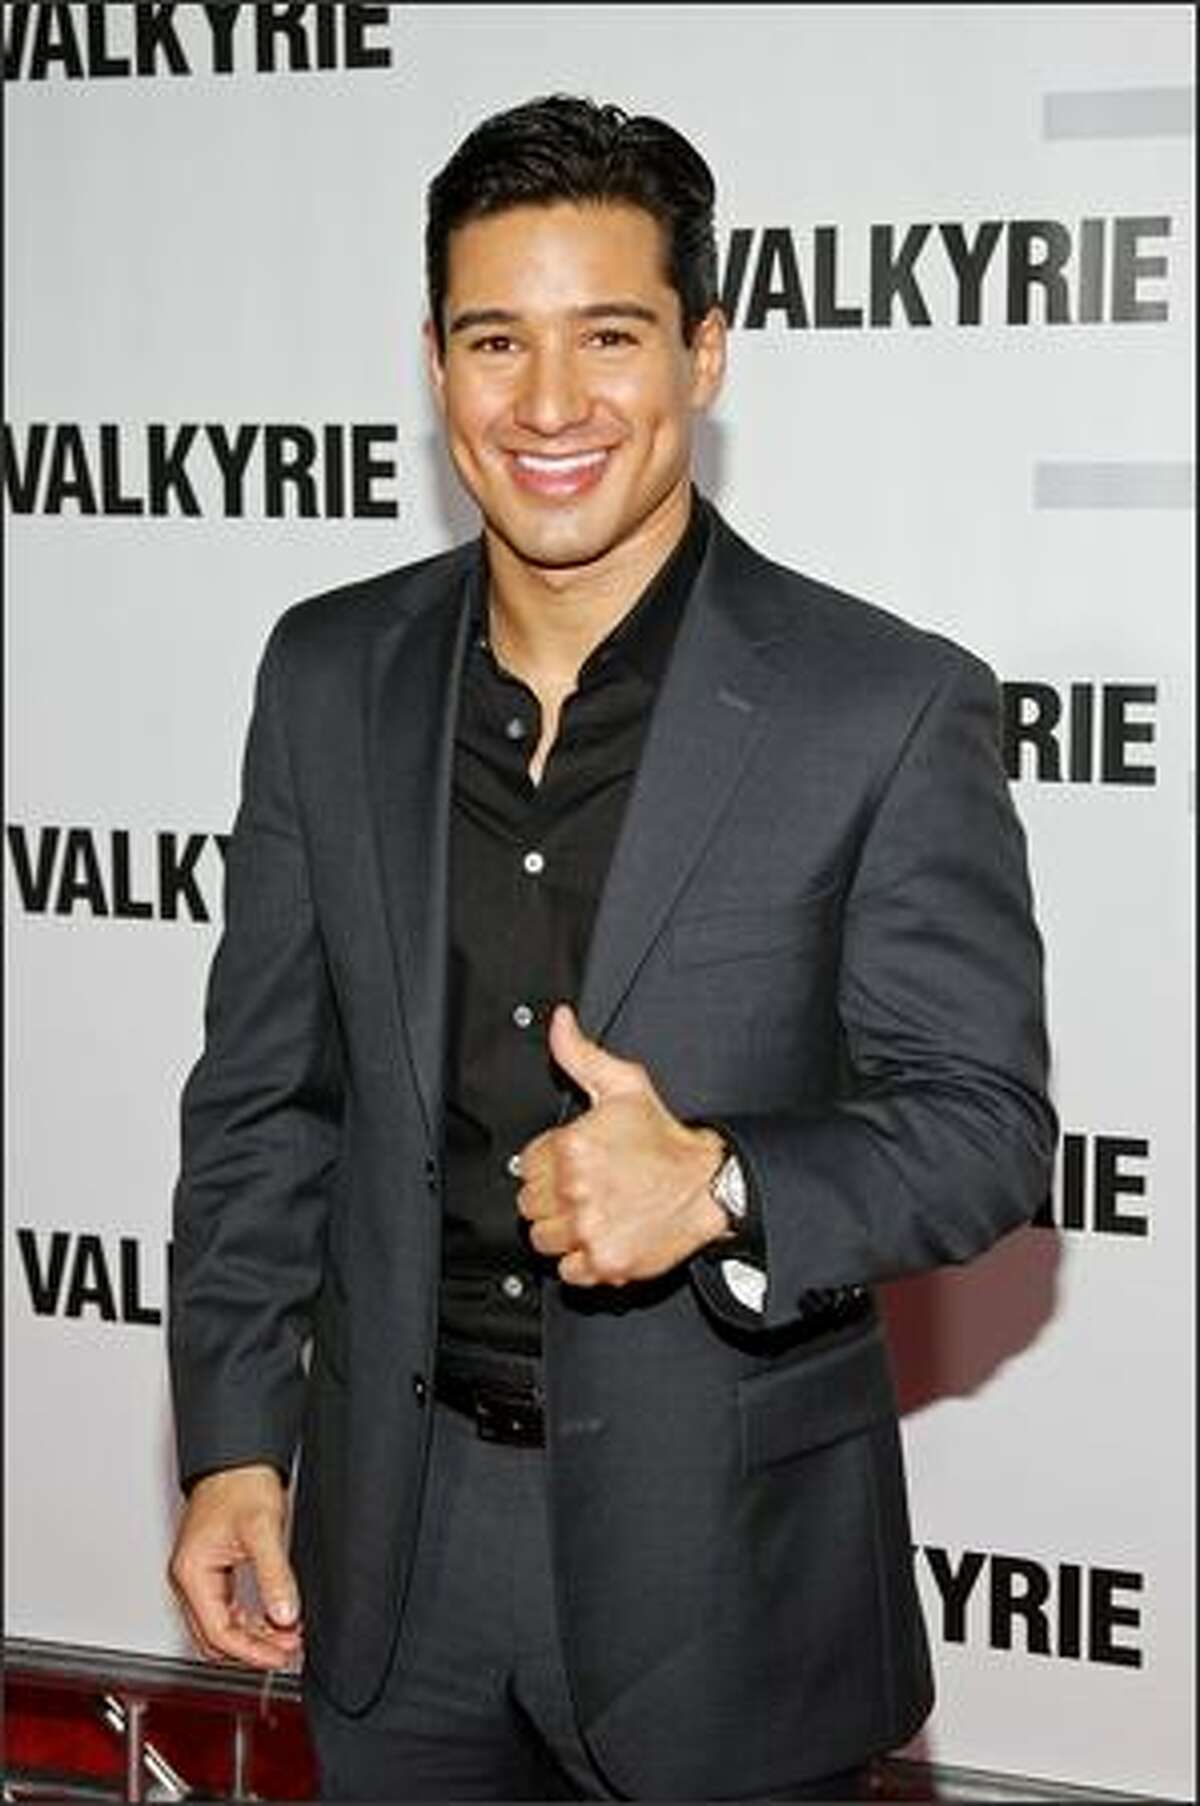 TV host/actor Mario Lopez attends the premiere of "Valkyrie" at Rose Hall inside the Time Warner Center on Monday in New York City.